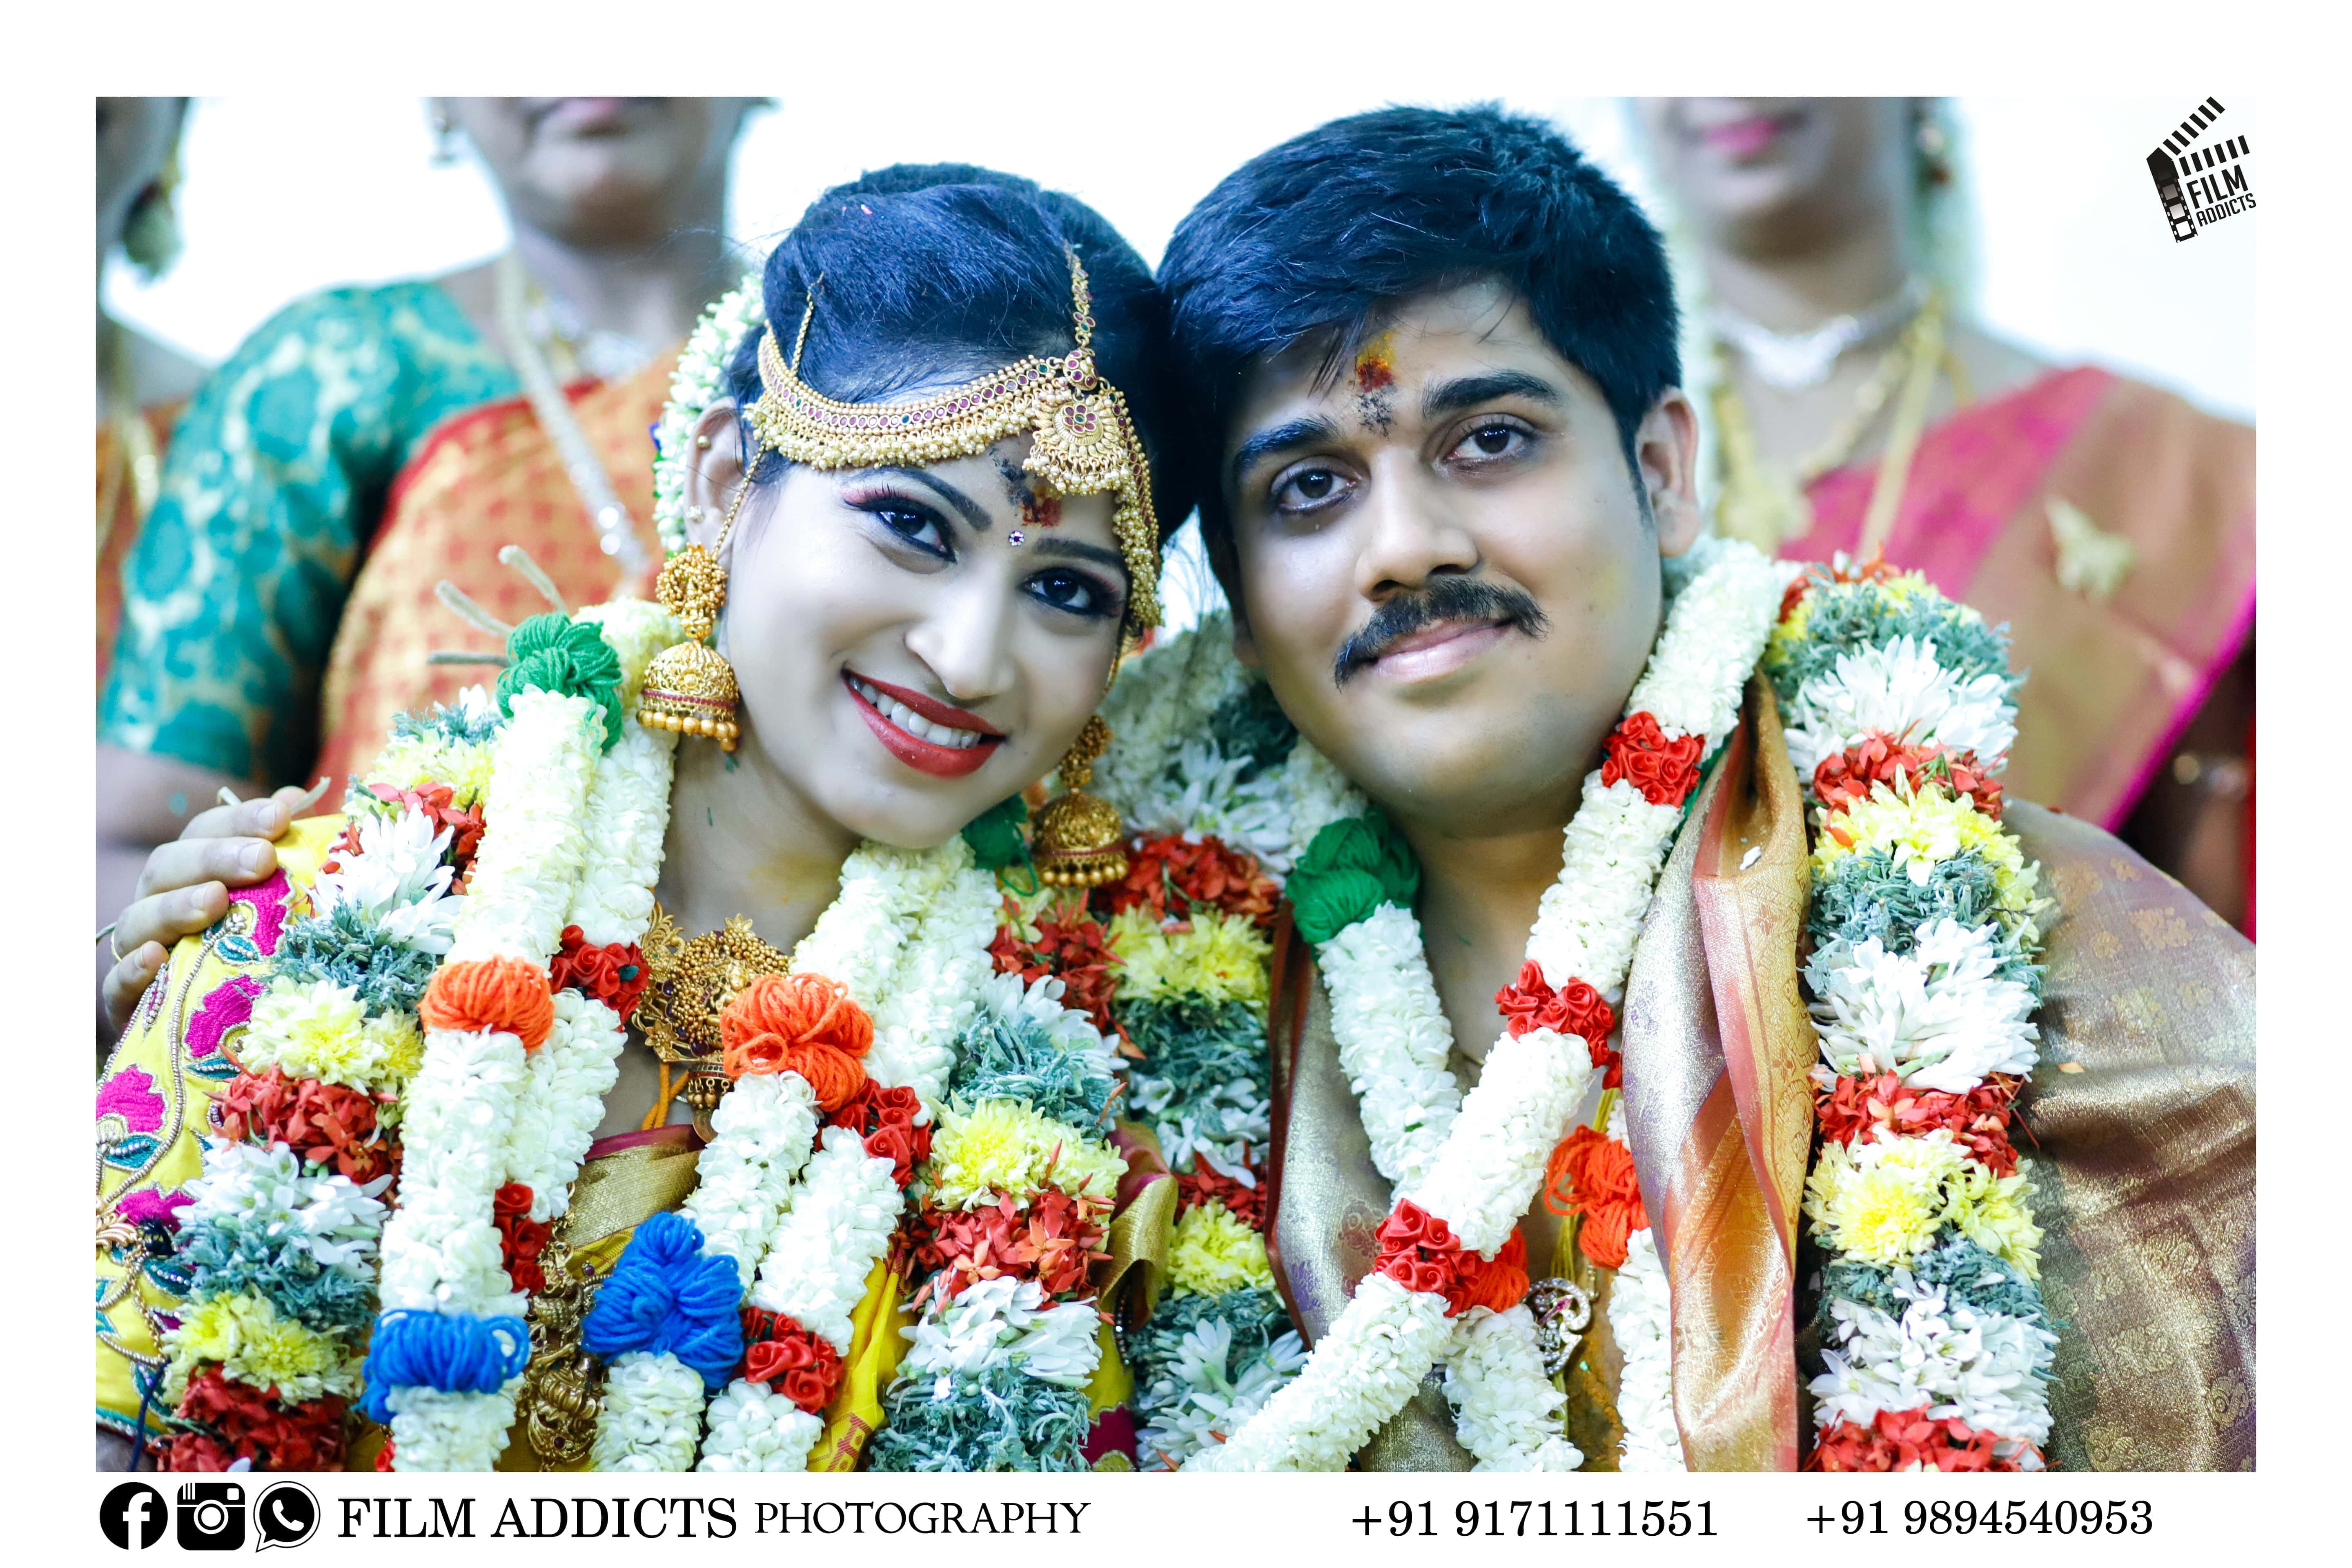 best-candid-photographers-in-theni,Candid-photography-in-theni,best-wedding -photography-in-theni,Best-candid-photography-inb-theni,    Best-candid-photographer,candid-photographer-in-theni,drone-photographer-in-theni,helicam-photographer-in-theni, 
    candid-wedding-photographers-in-theni,photographers-in-theni,professional-wedding-photographers-in-theni,
    top-wedding-filmmakers-in-theni,wedding-cinematographers-in-theni,wedding-cinimatography-in-theni,wedding-photographers-in-theni,
    wedding-teaser-in-theni, asian-wedding-photography-in-theni, best-candid-photographers-in-theni, best-candid-videographers-in-theni,  
    best-photographers-in-theni best-wedding-photographers-in-theni, 
    best-nadar-wedding-photography-in-theni candid-photographers-in-theni destination-wedding-photographers-in-theni,
    fashion-photographers-in-theni, theni-famous-stage-decorations